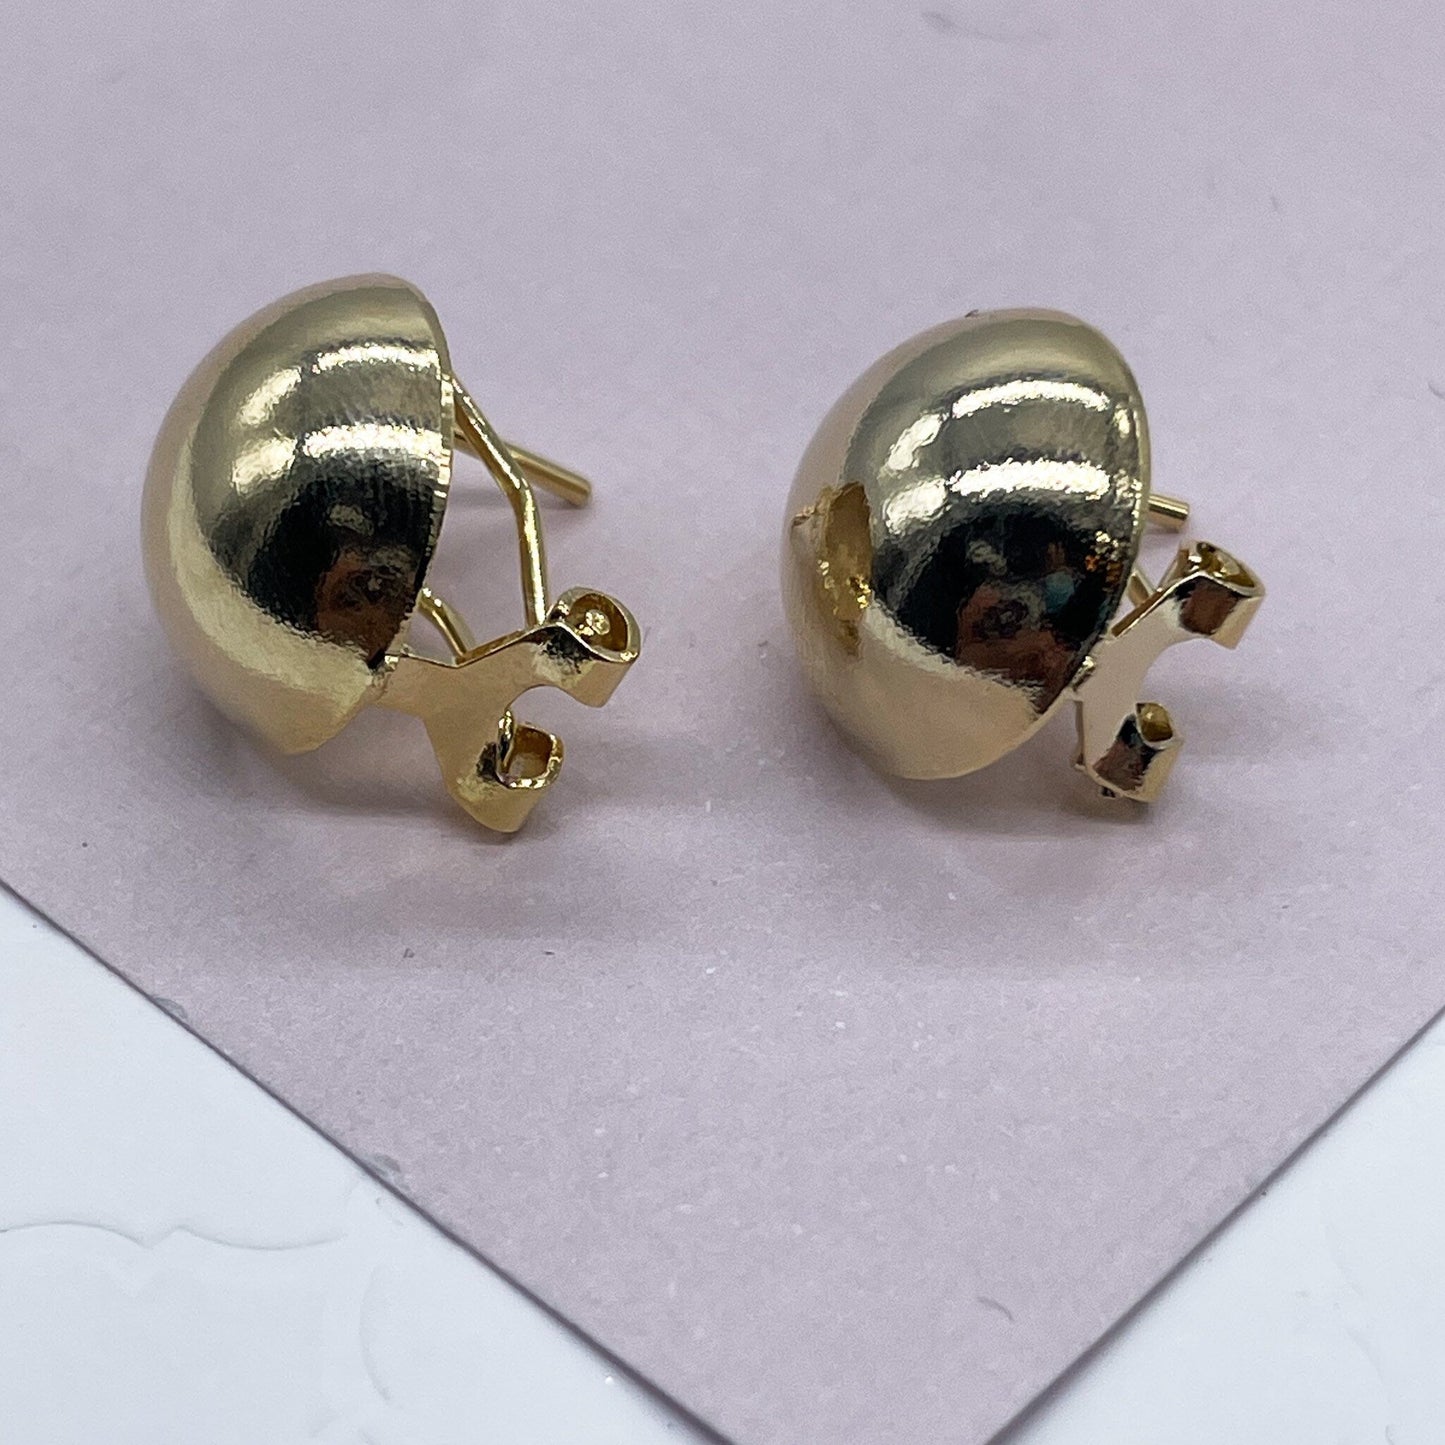 18k Gold Layered Concave Round Stud Earrings With Safe Post And Clip, Half Ball